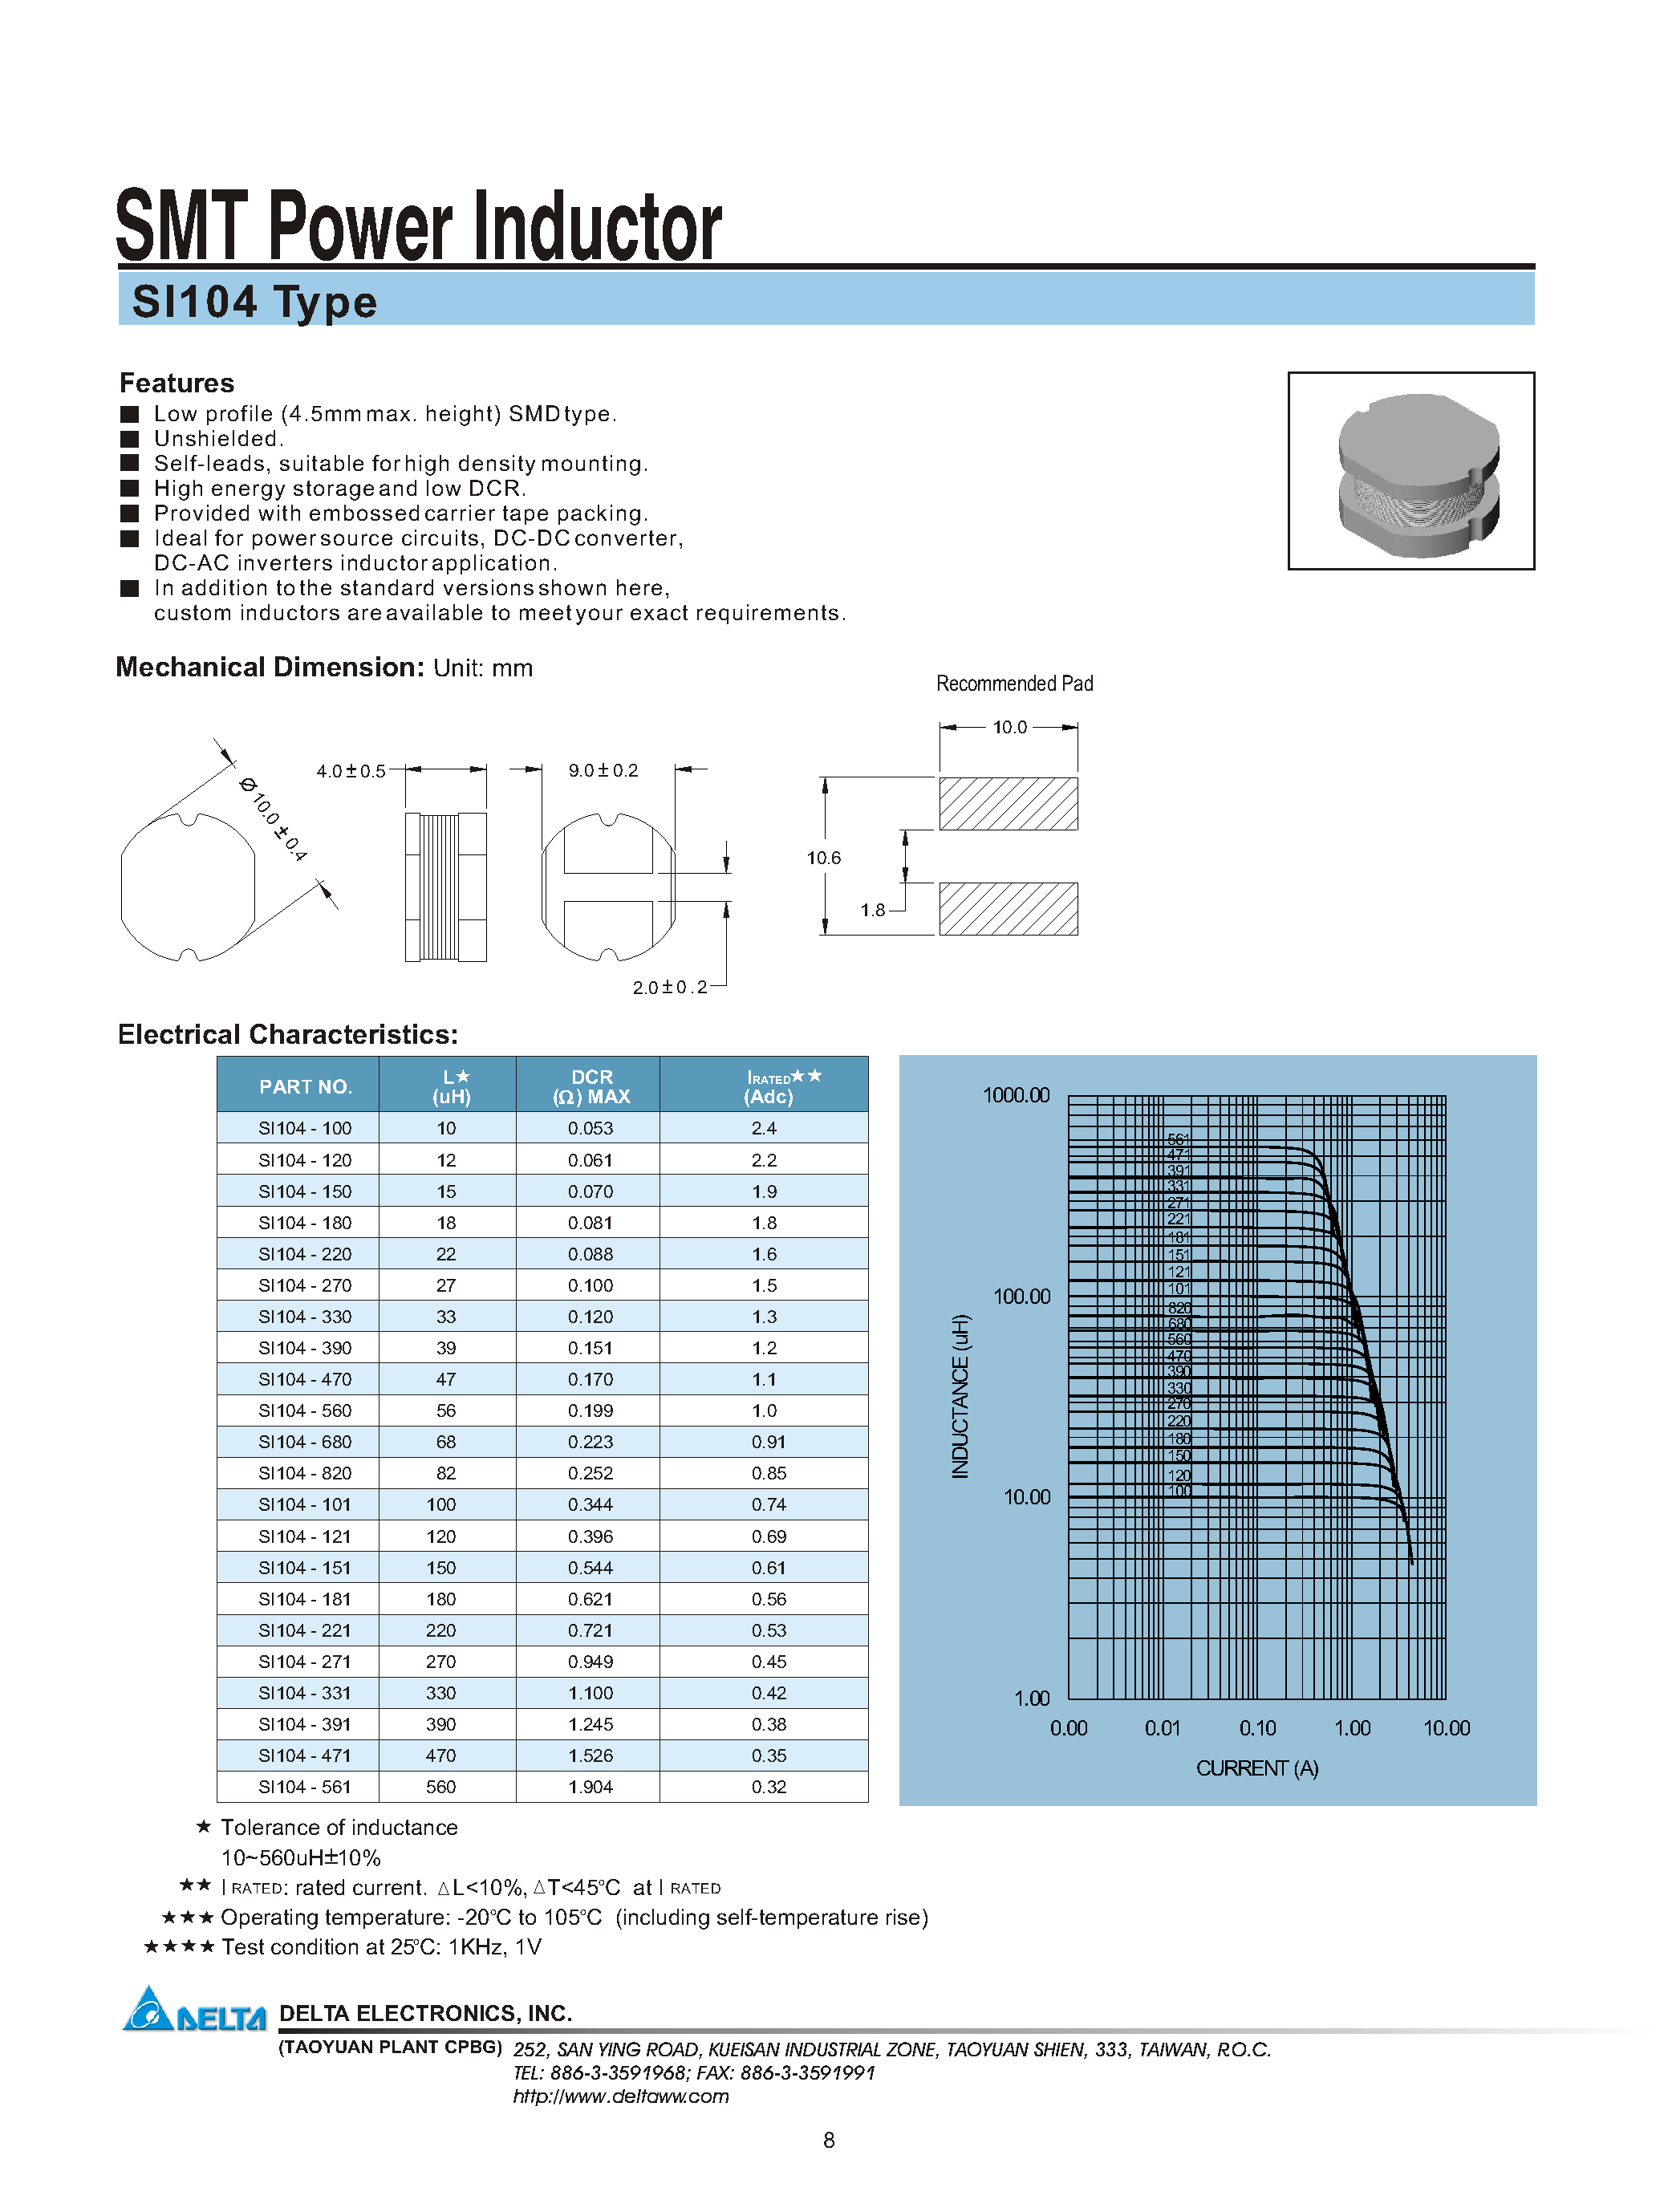 Datasheet SI104-391 - SMT Power Inductor page 1